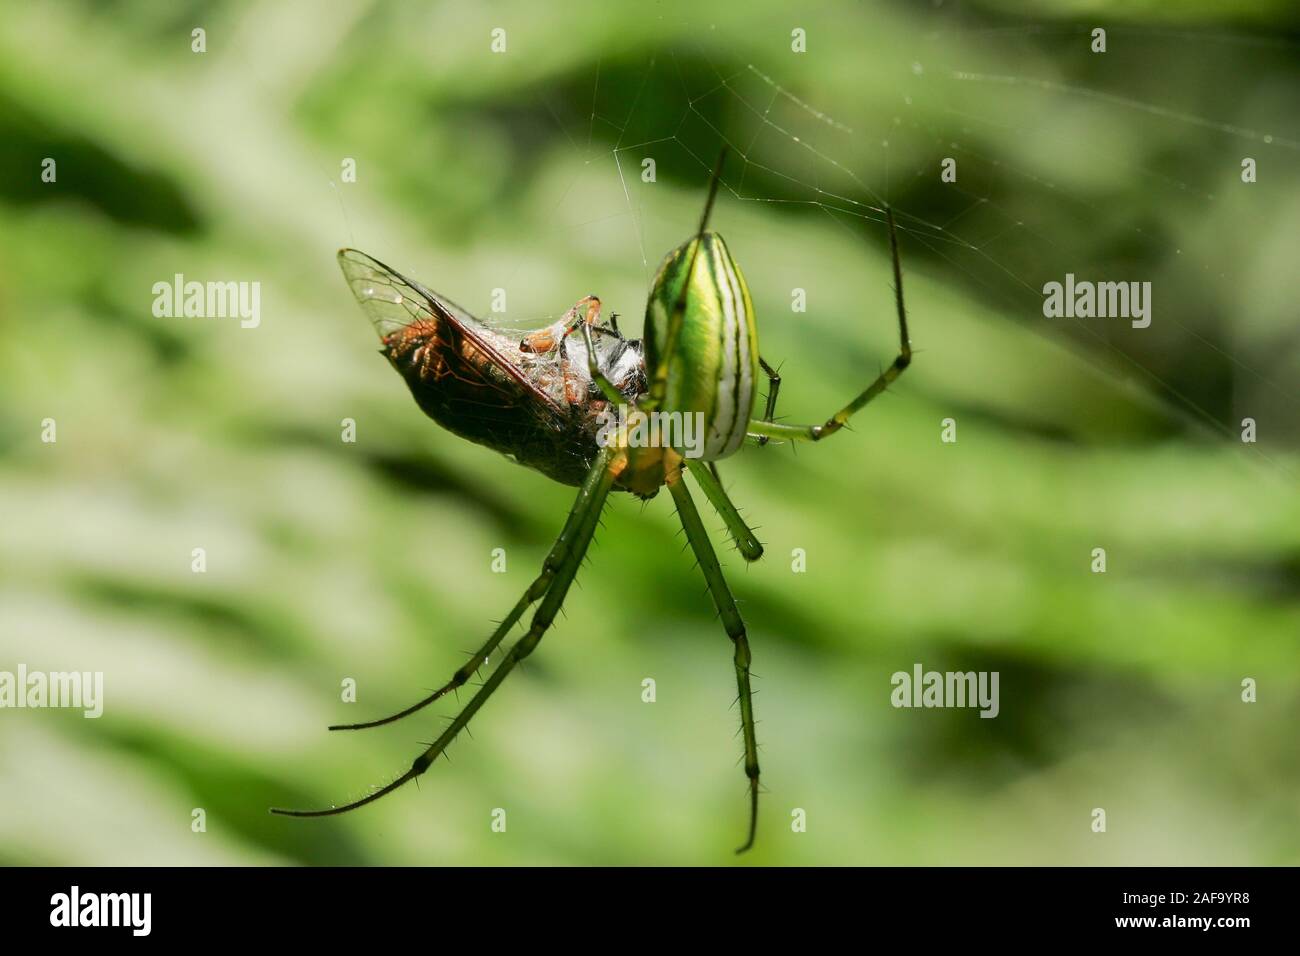 Orchard Orbweaver Spider eating on the web, photo taken in Taiwan Stock Photo